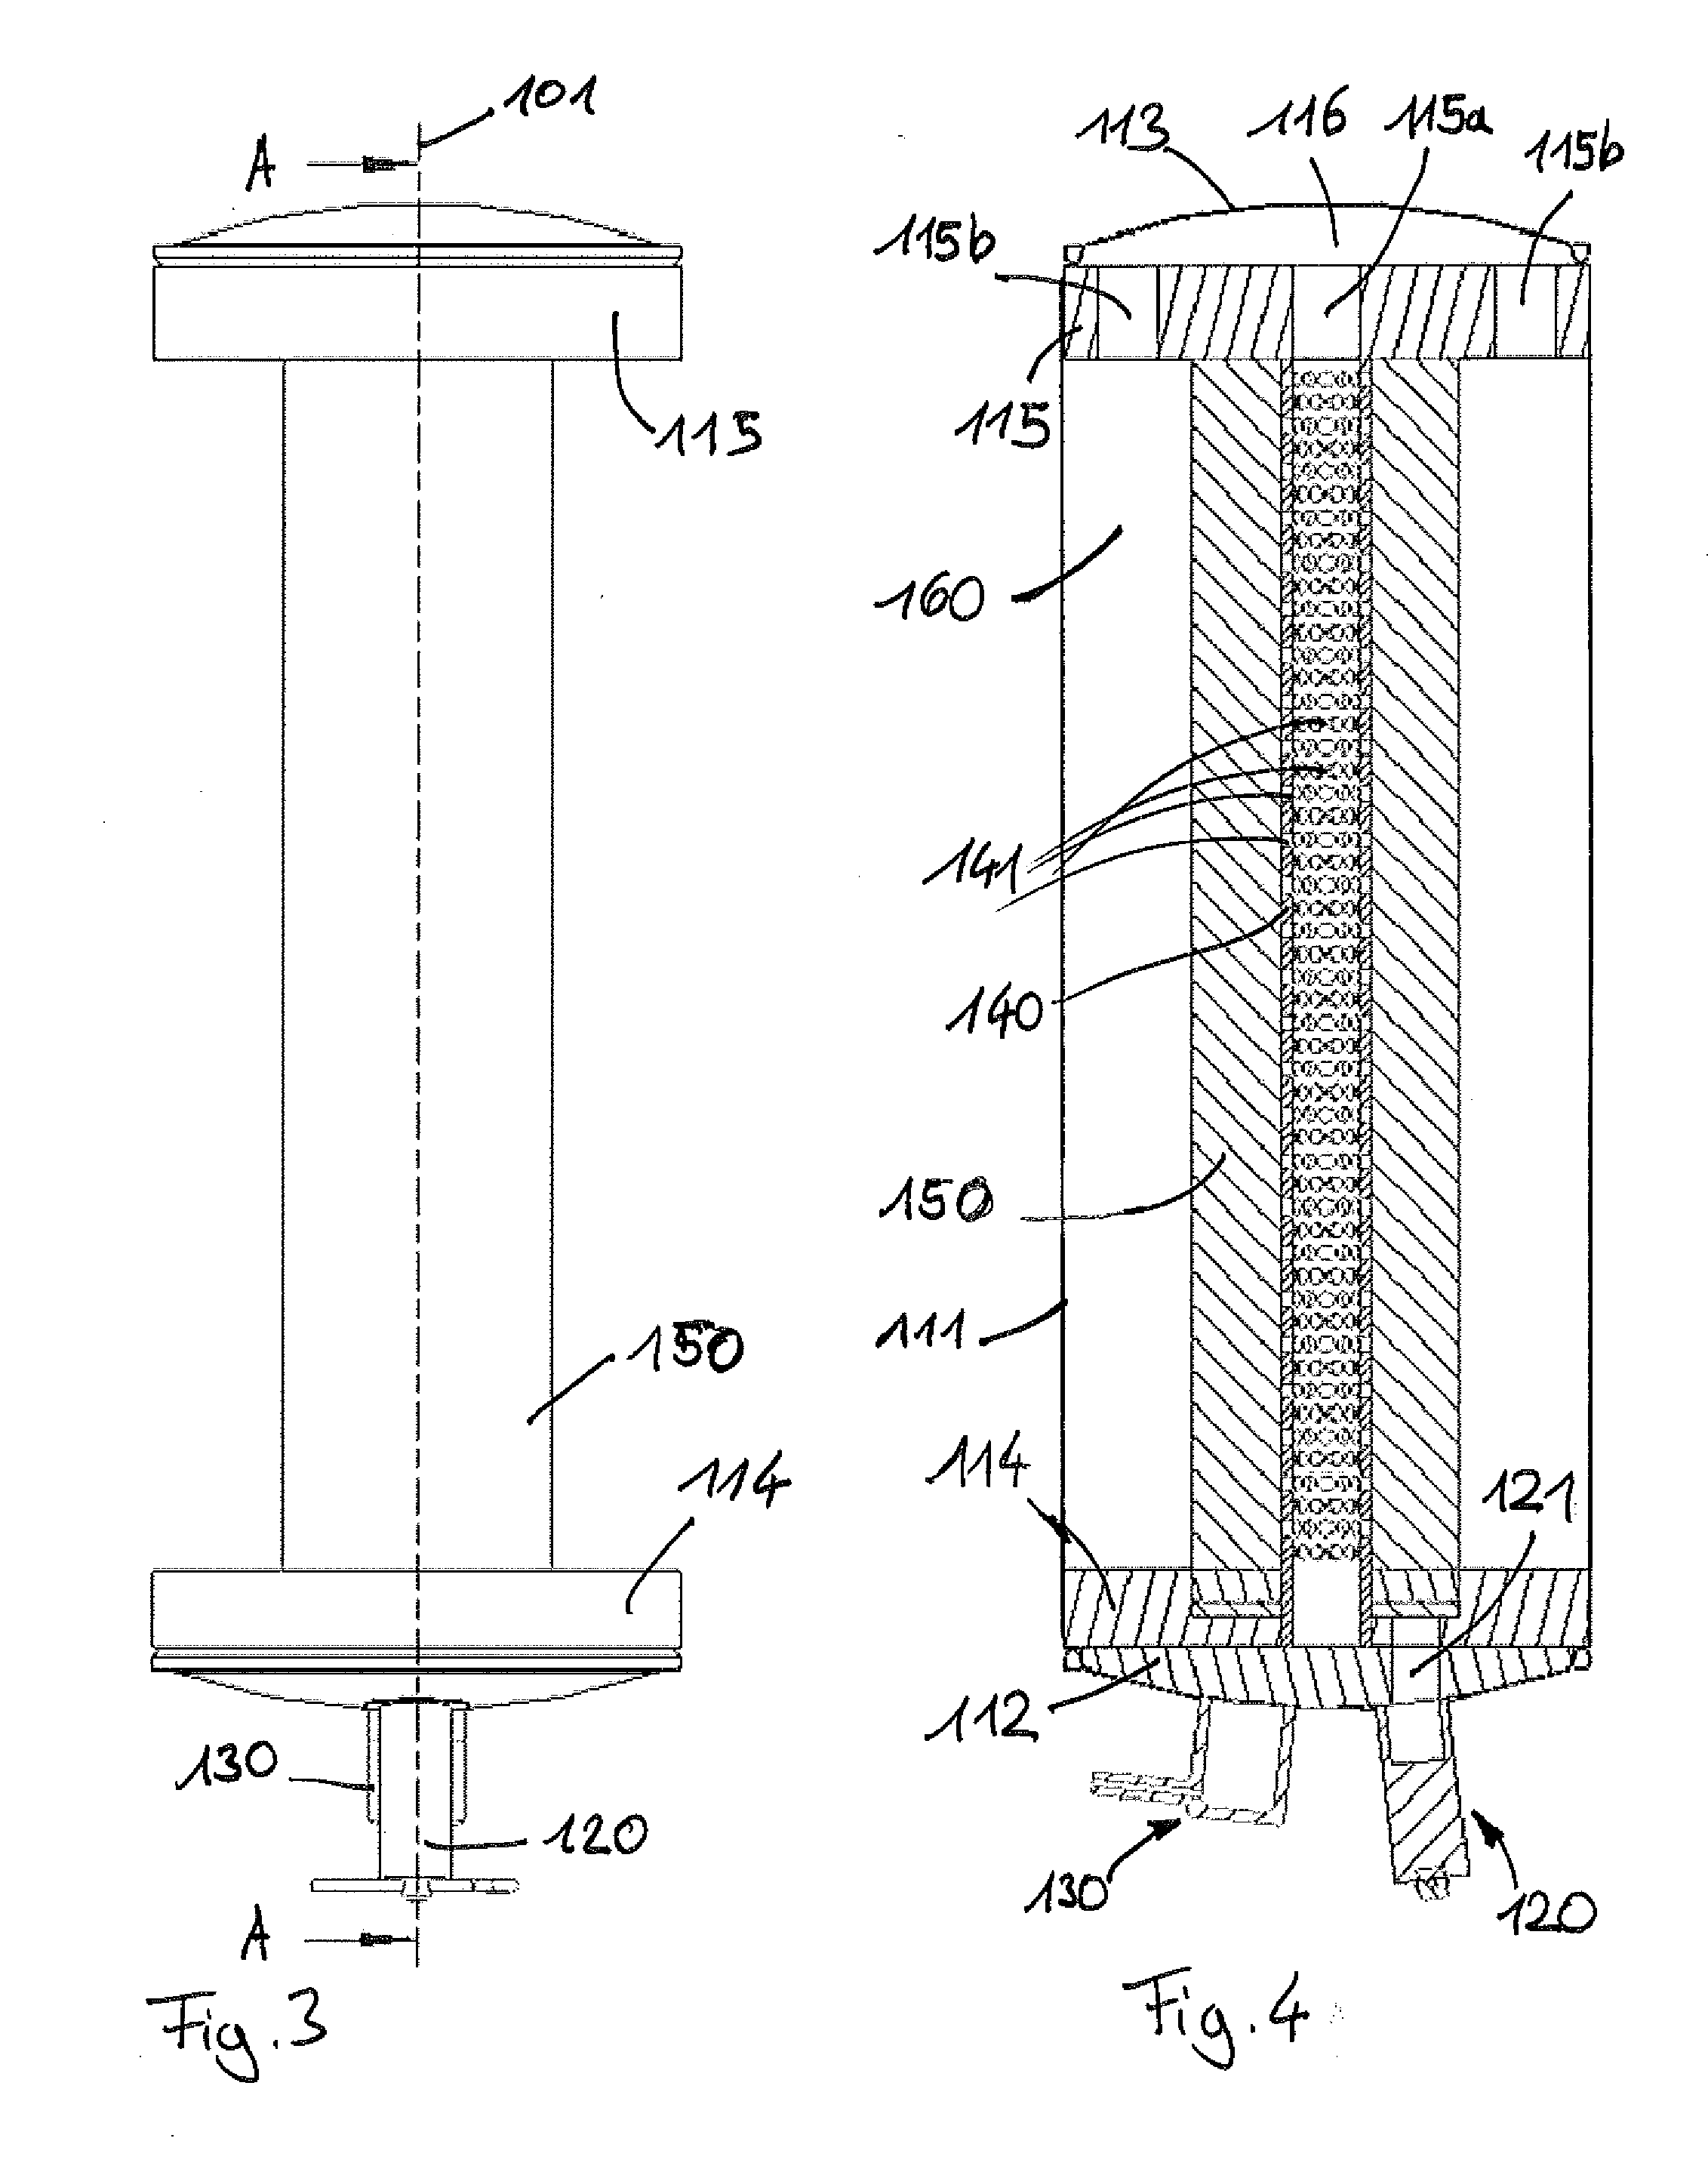 Chemical oxygen generator with core channel tube for an emergency oxygen device